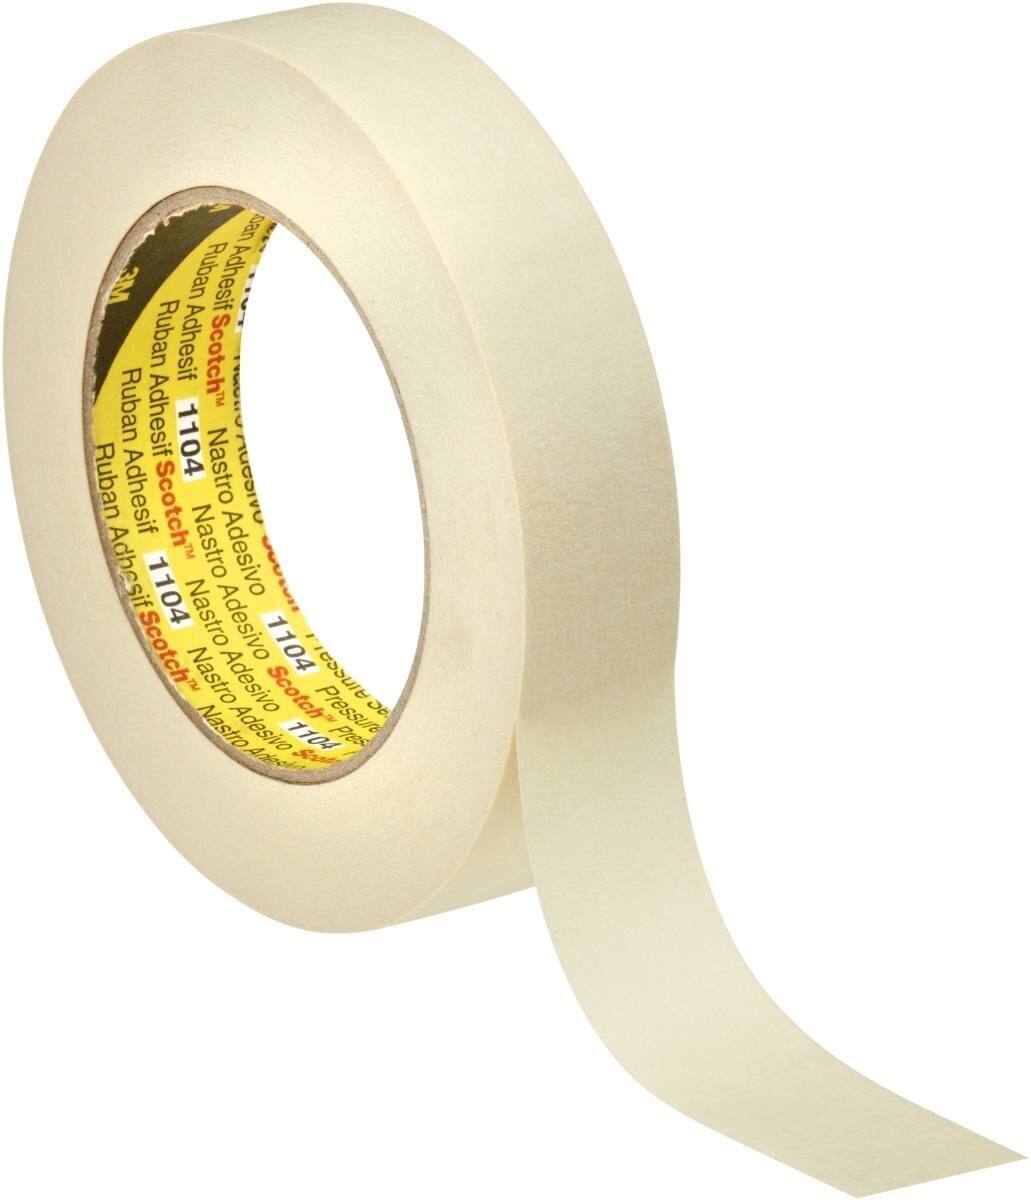 3M Scotch Special Painting Masking Tape 1104, Beige, 1500 mm x 50 m, 0.155 mm